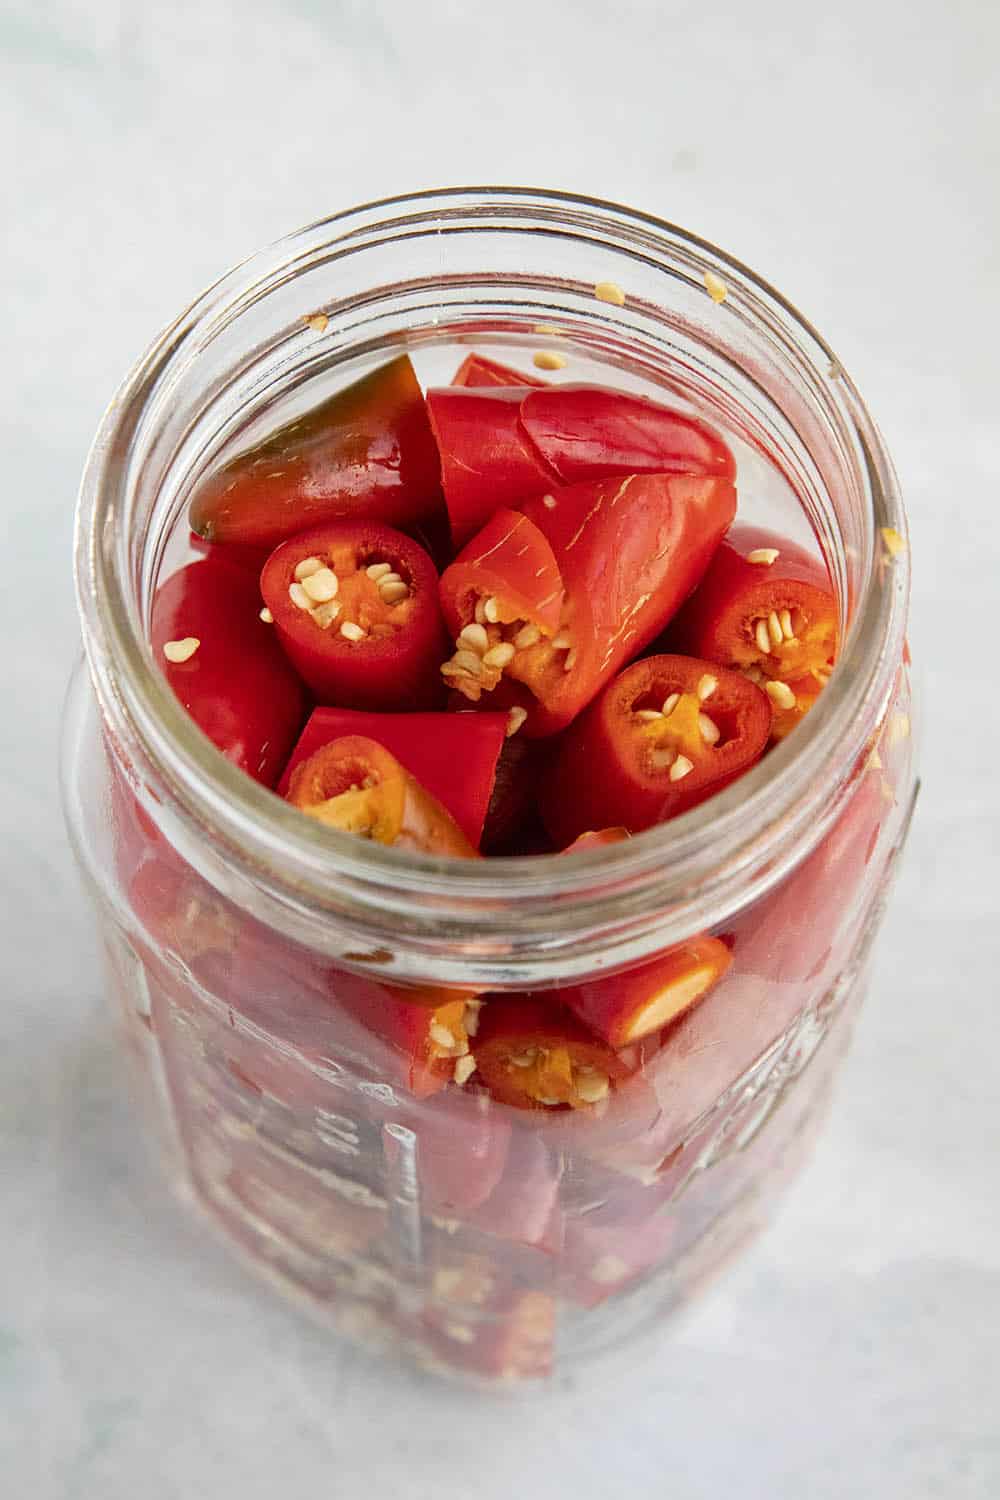 Red serrano peppers stuffed into a jar, ready for the brine to ferment